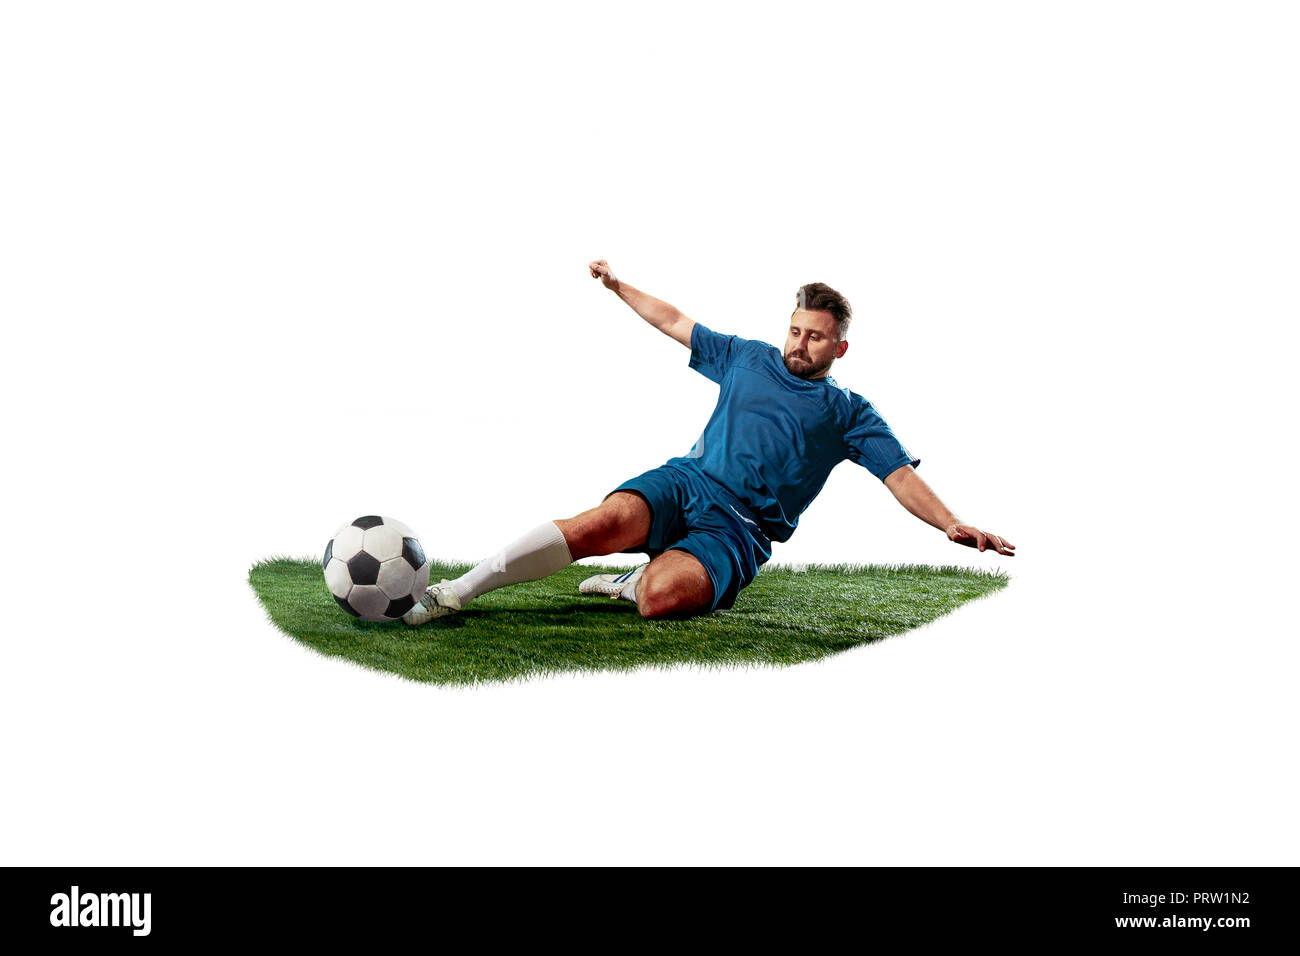 Football player tackling for the ball over white background. Professional  football soccer player in motion isolated on white studio background. Fit  fighting man in action, movement at game with ball Stock Photo 